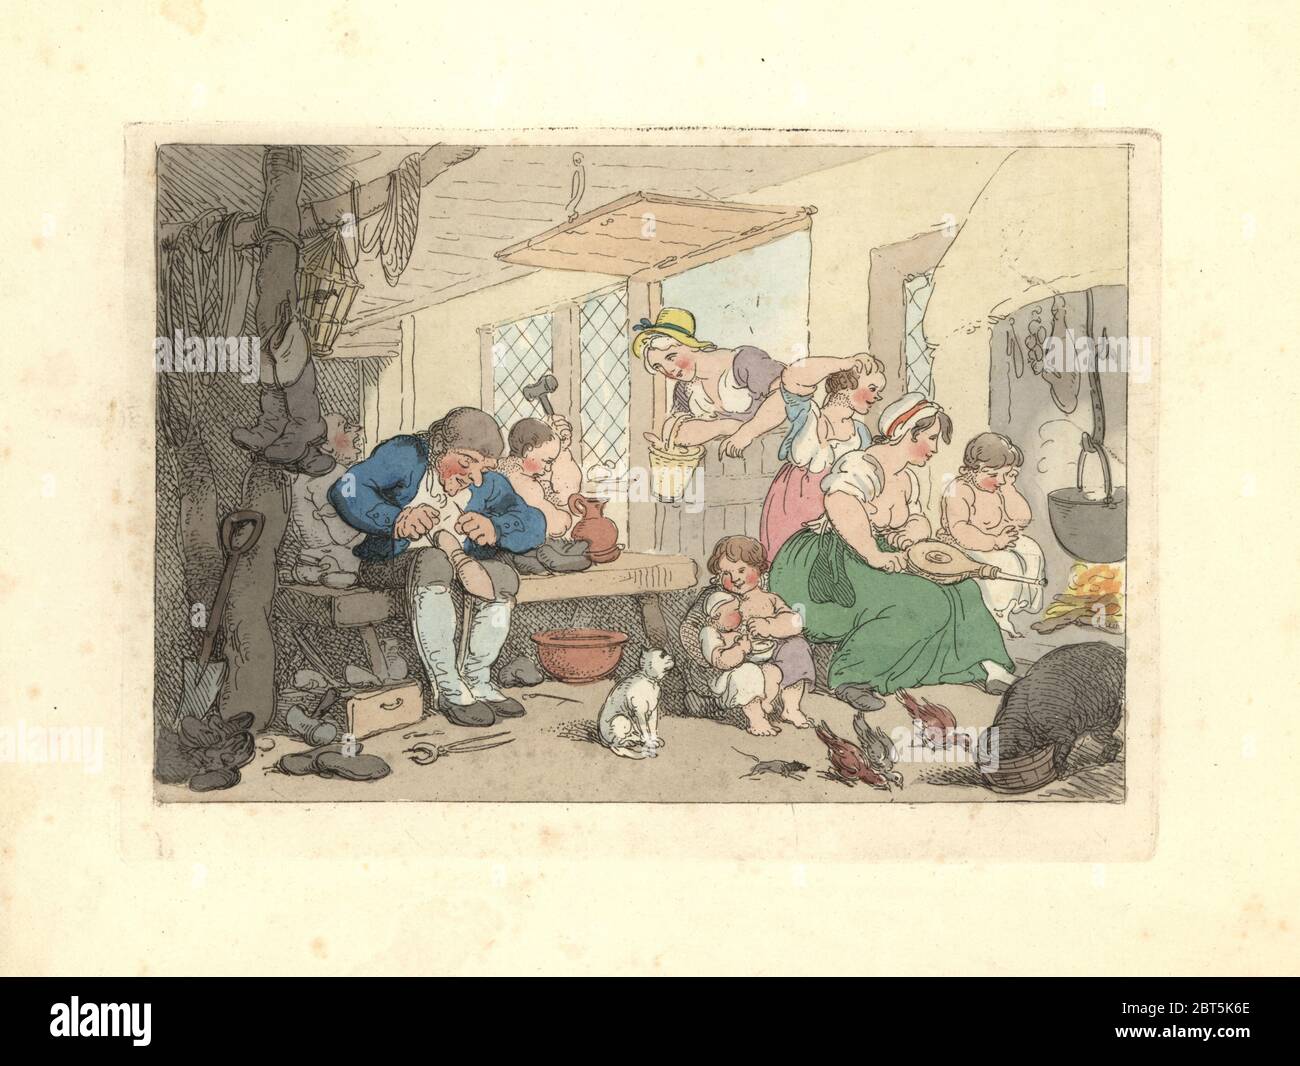 Regency cobbler mending shoes in a room full of women and children. Buxom wife using bellows on the fire in the hearth. Handcoloured copperplate engraving designed and etched by Thomas Rowlandson to accompany Reverend James Beresfords Miseries of Human Life, Ackermann, 1808. Stock Photo